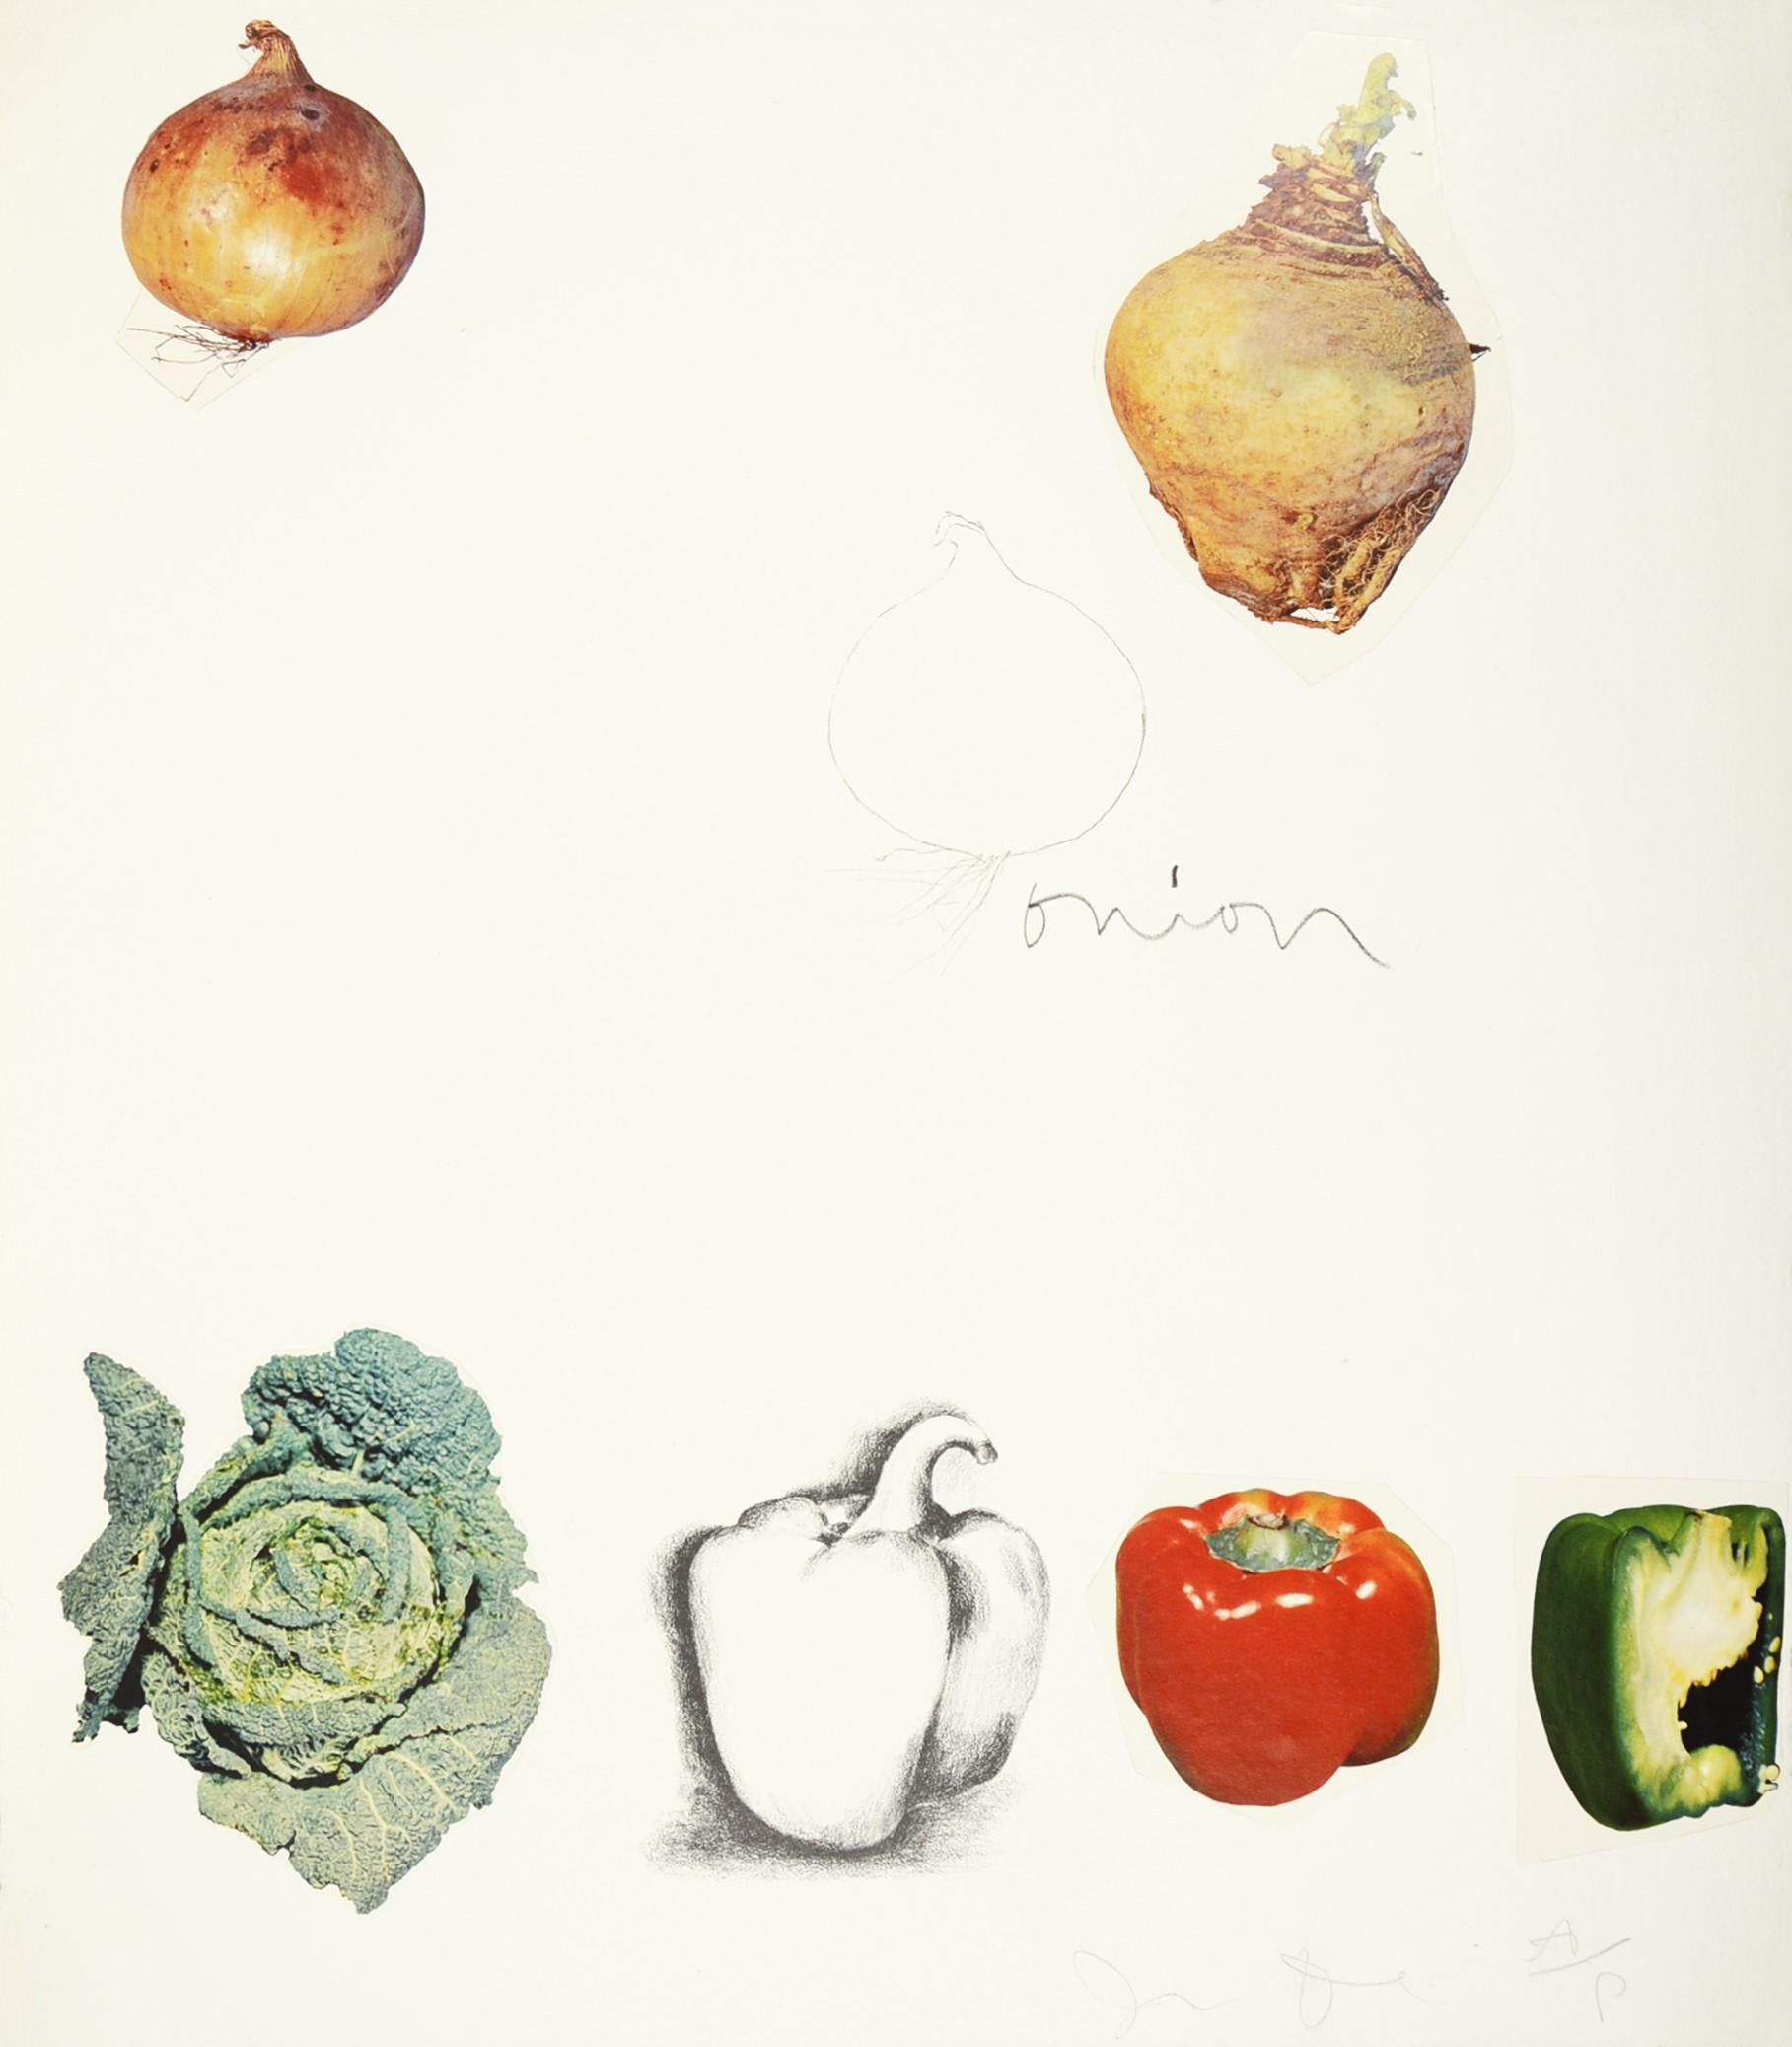 lithograph with collage in colours, on Hodgkinson handmade paper, 1970, signed and inscribed 'A/P' in pencil one of 12 artist's proof sets, the edition was 96), published by Petersburg Press, New York, 47.7 x 43 cm